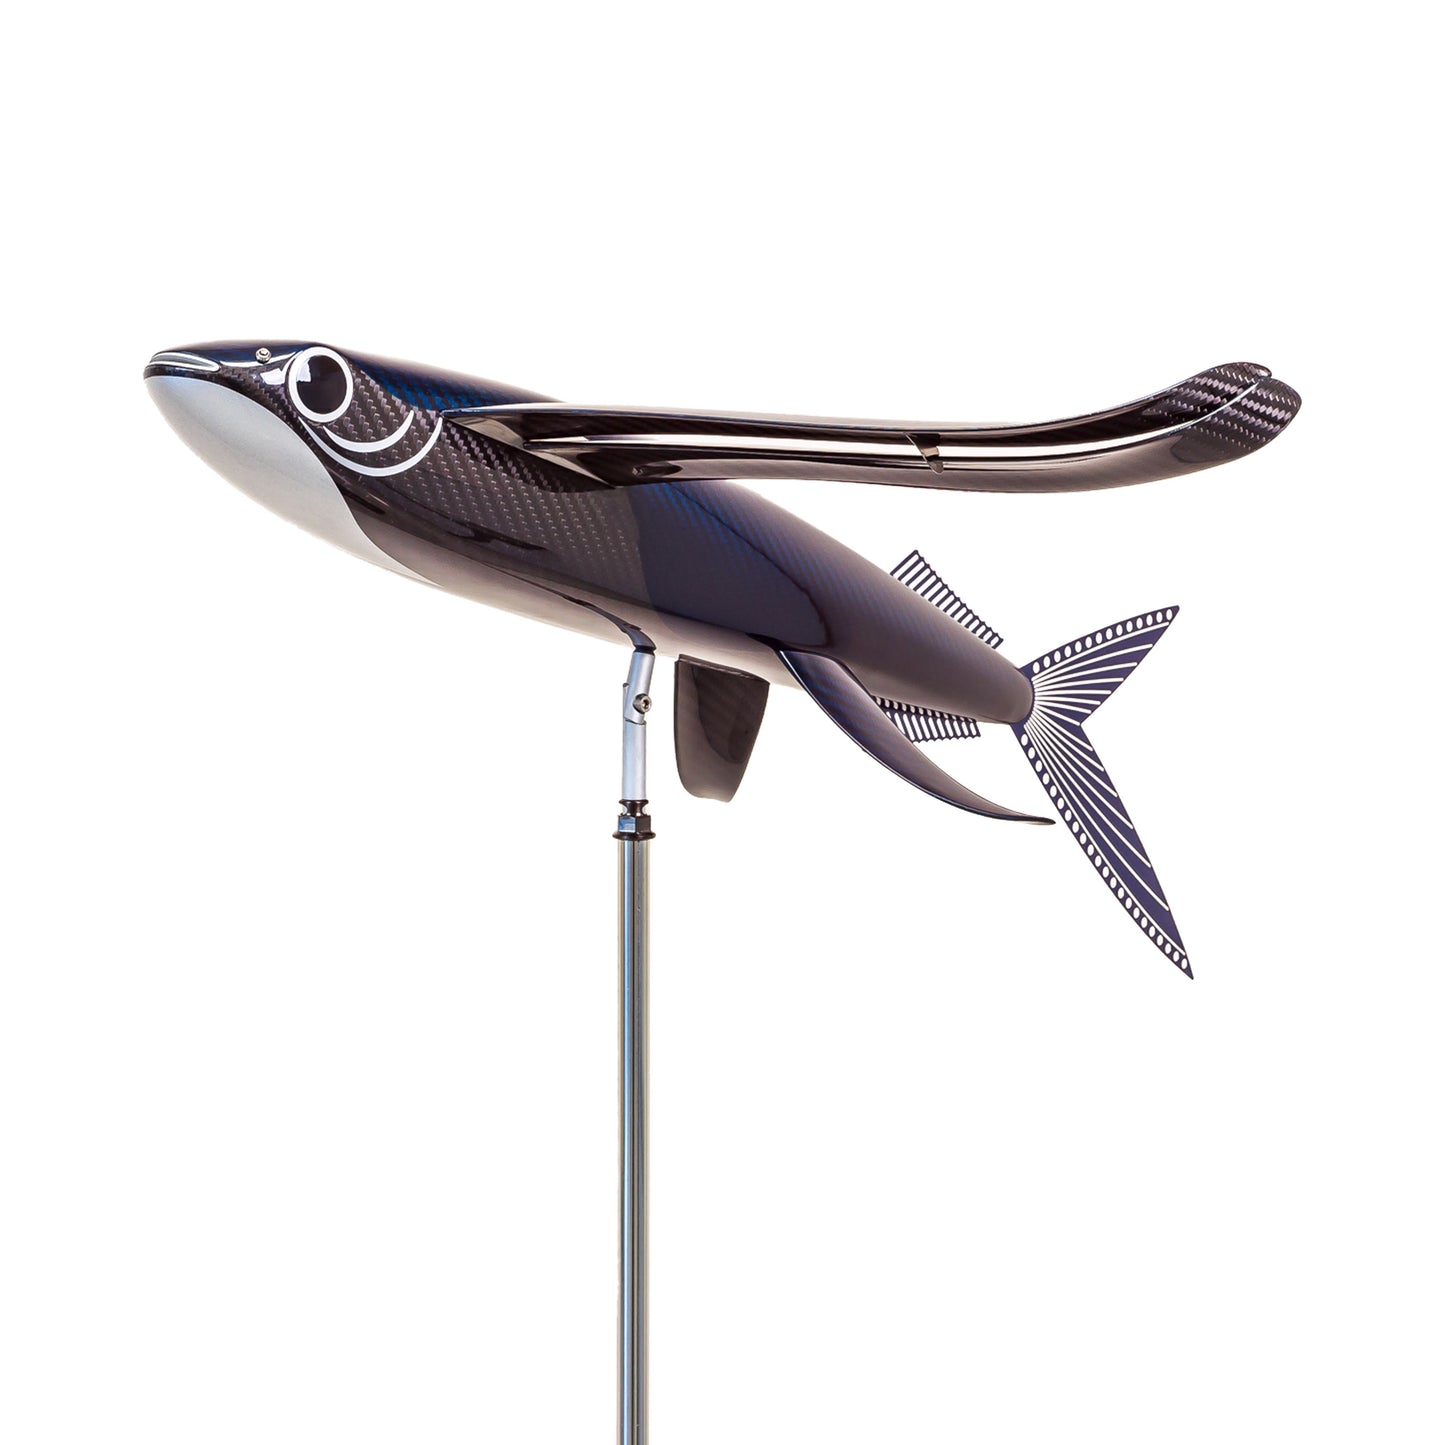 Carbon fibre Flying Fish sculpture with blue tint